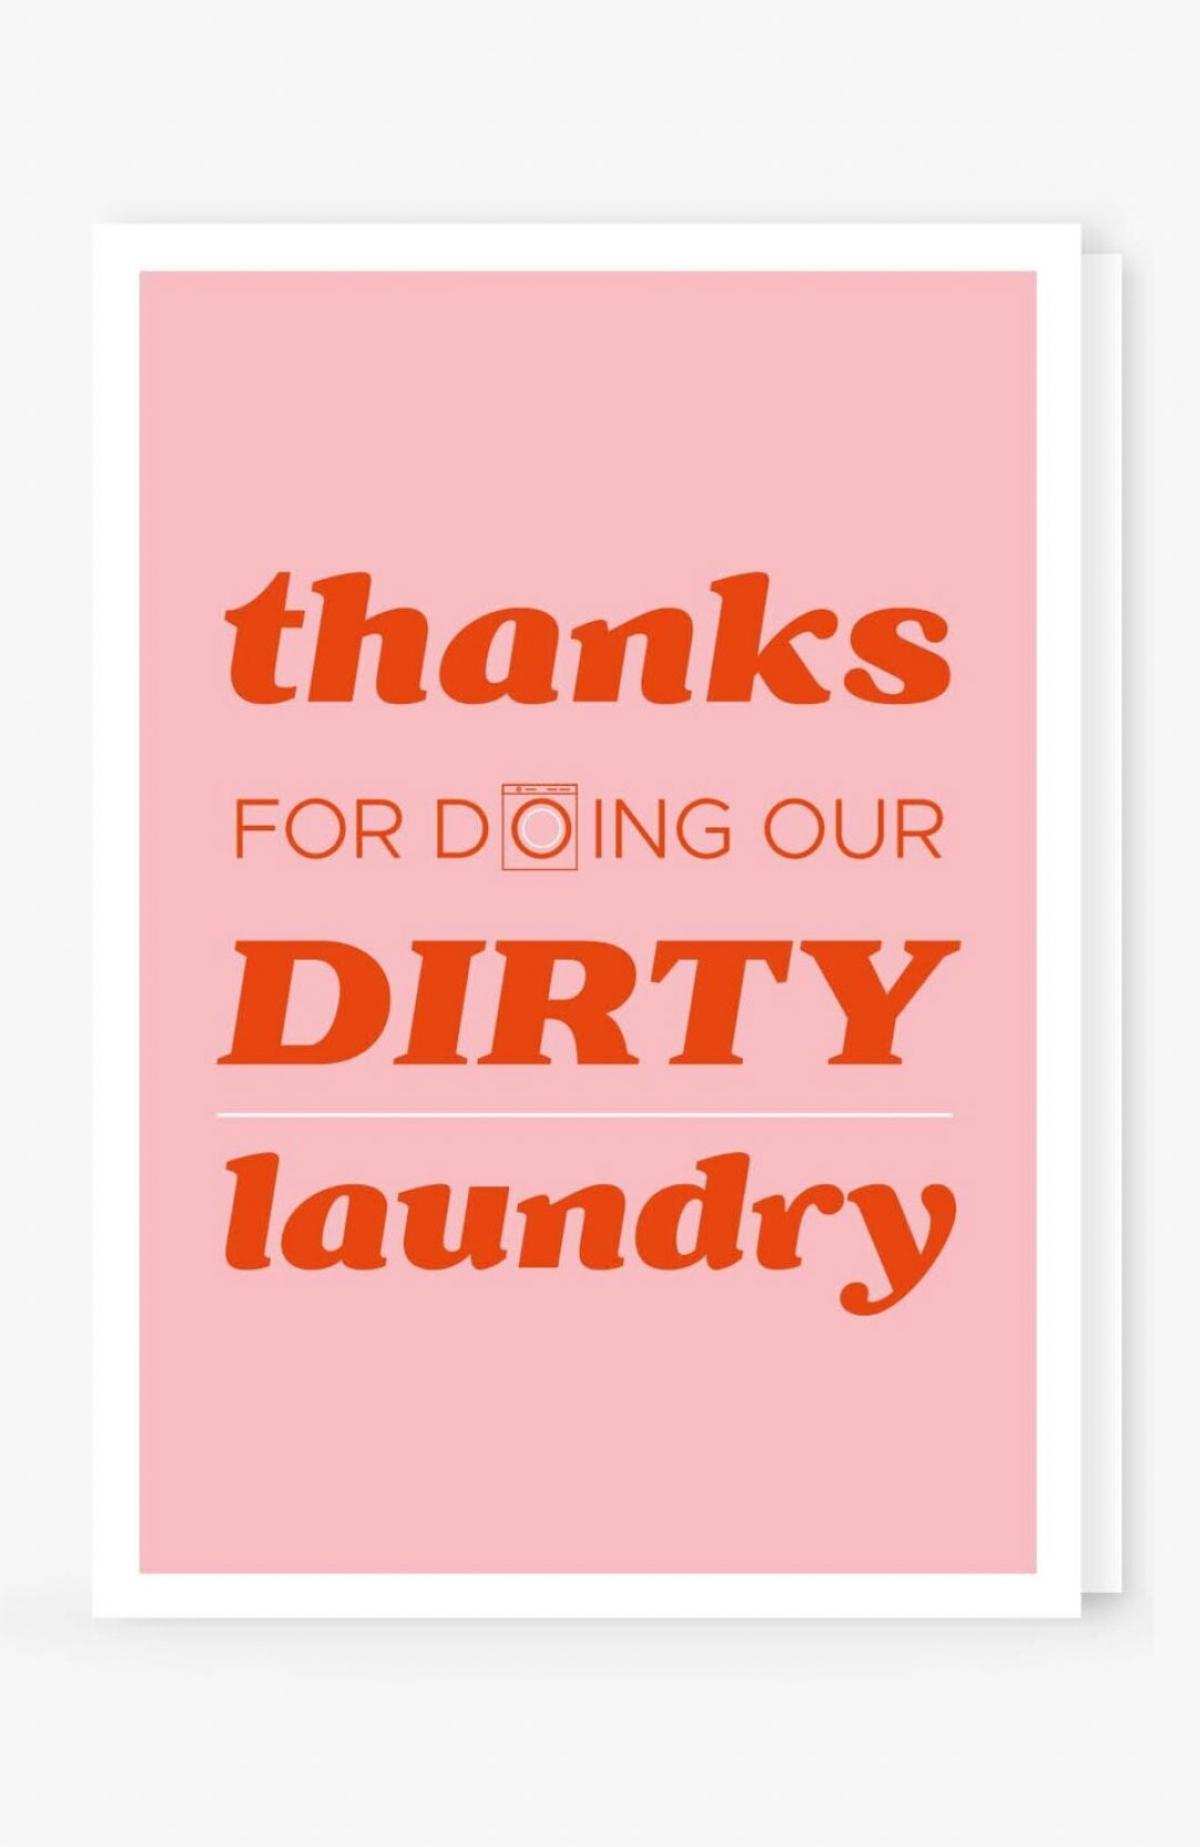 'Thanks for doing our dirty laundry'